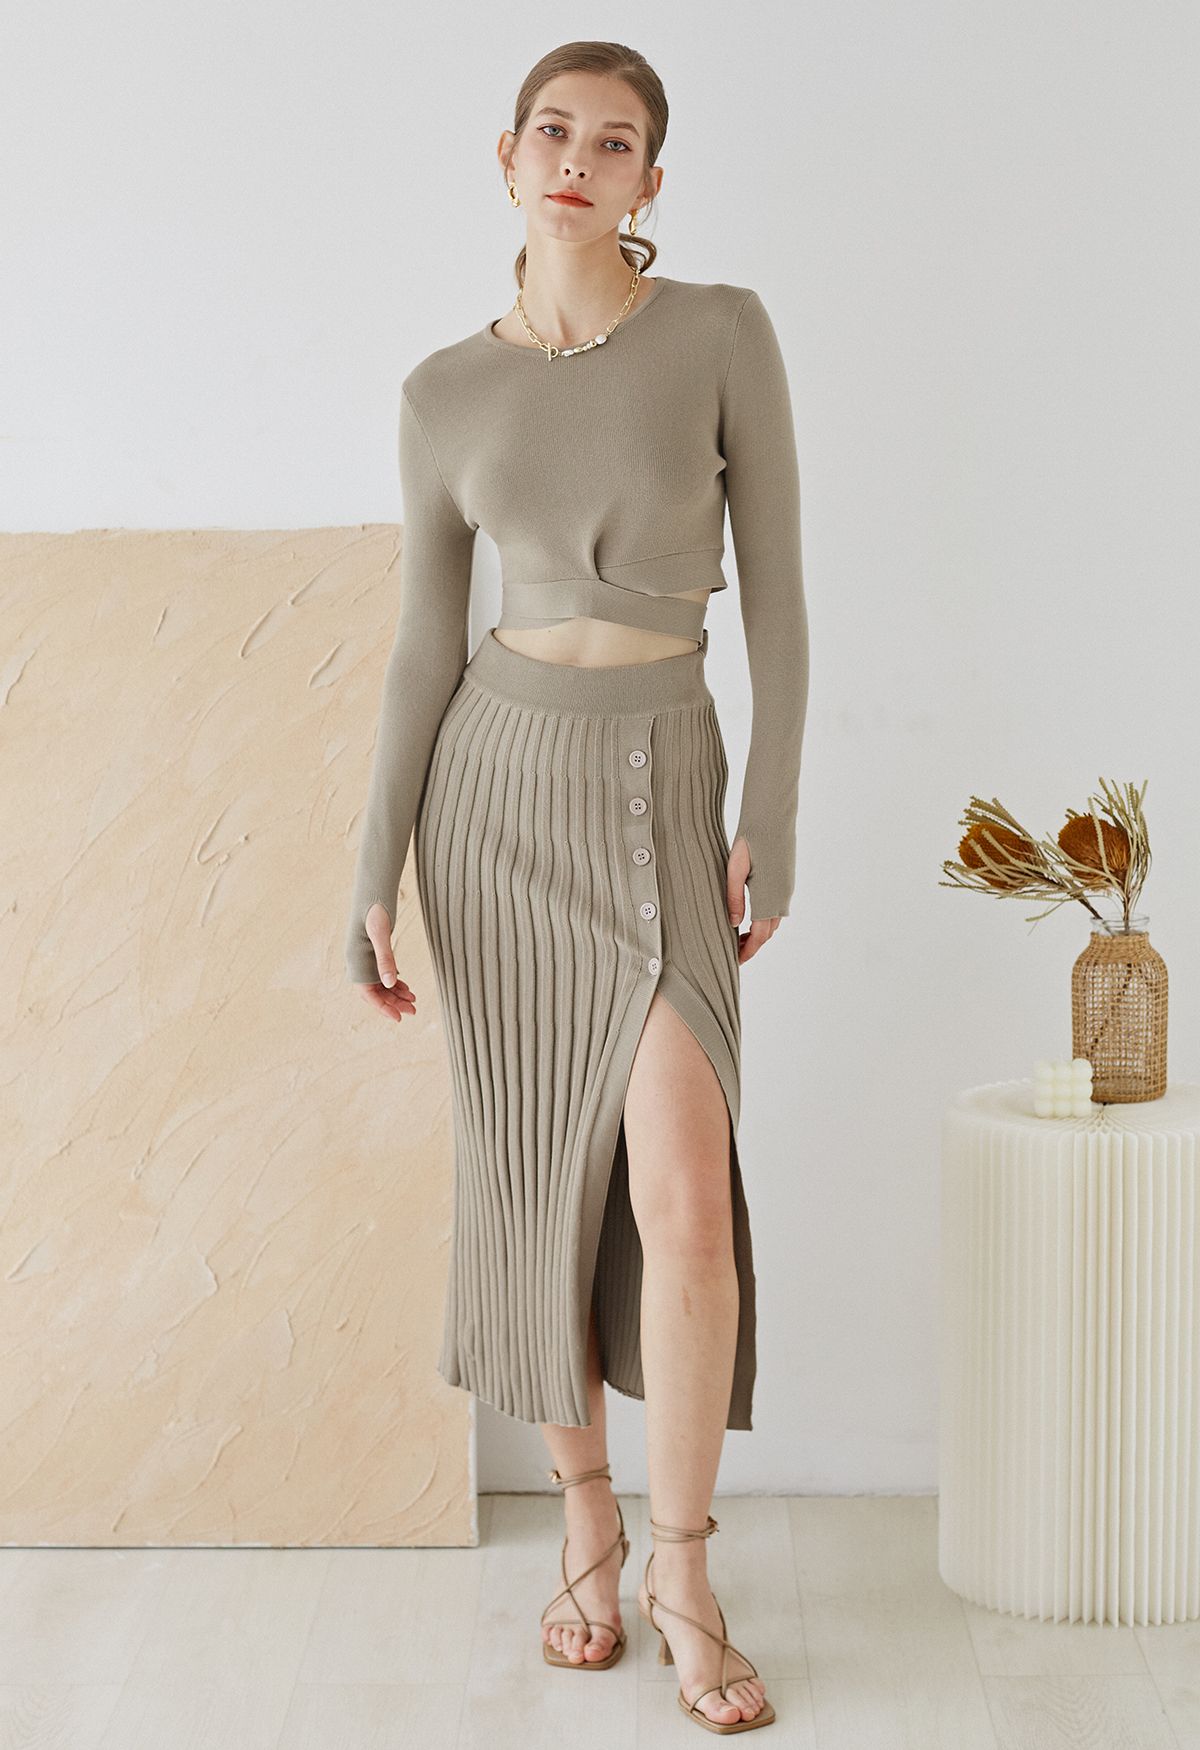 Buttoned Front Slit Rib Knit Skirt in Taupe